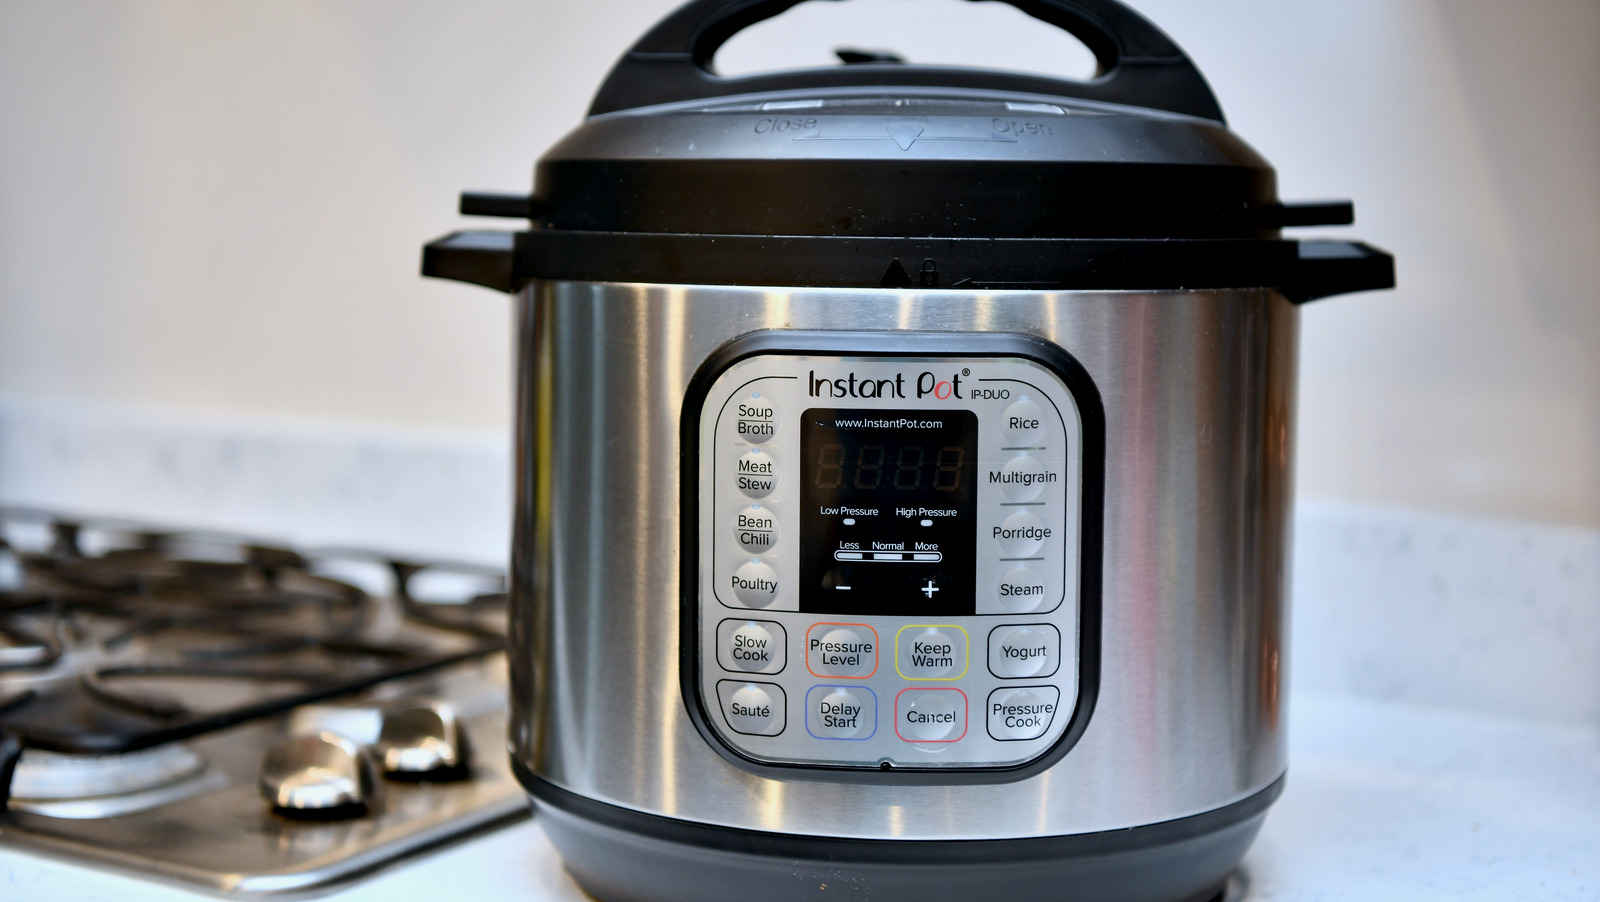 https://www.mashed.com/img/gallery/heres-everything-you-need-to-know-about-your-instant-pot/l-intro-1642094951.jpg